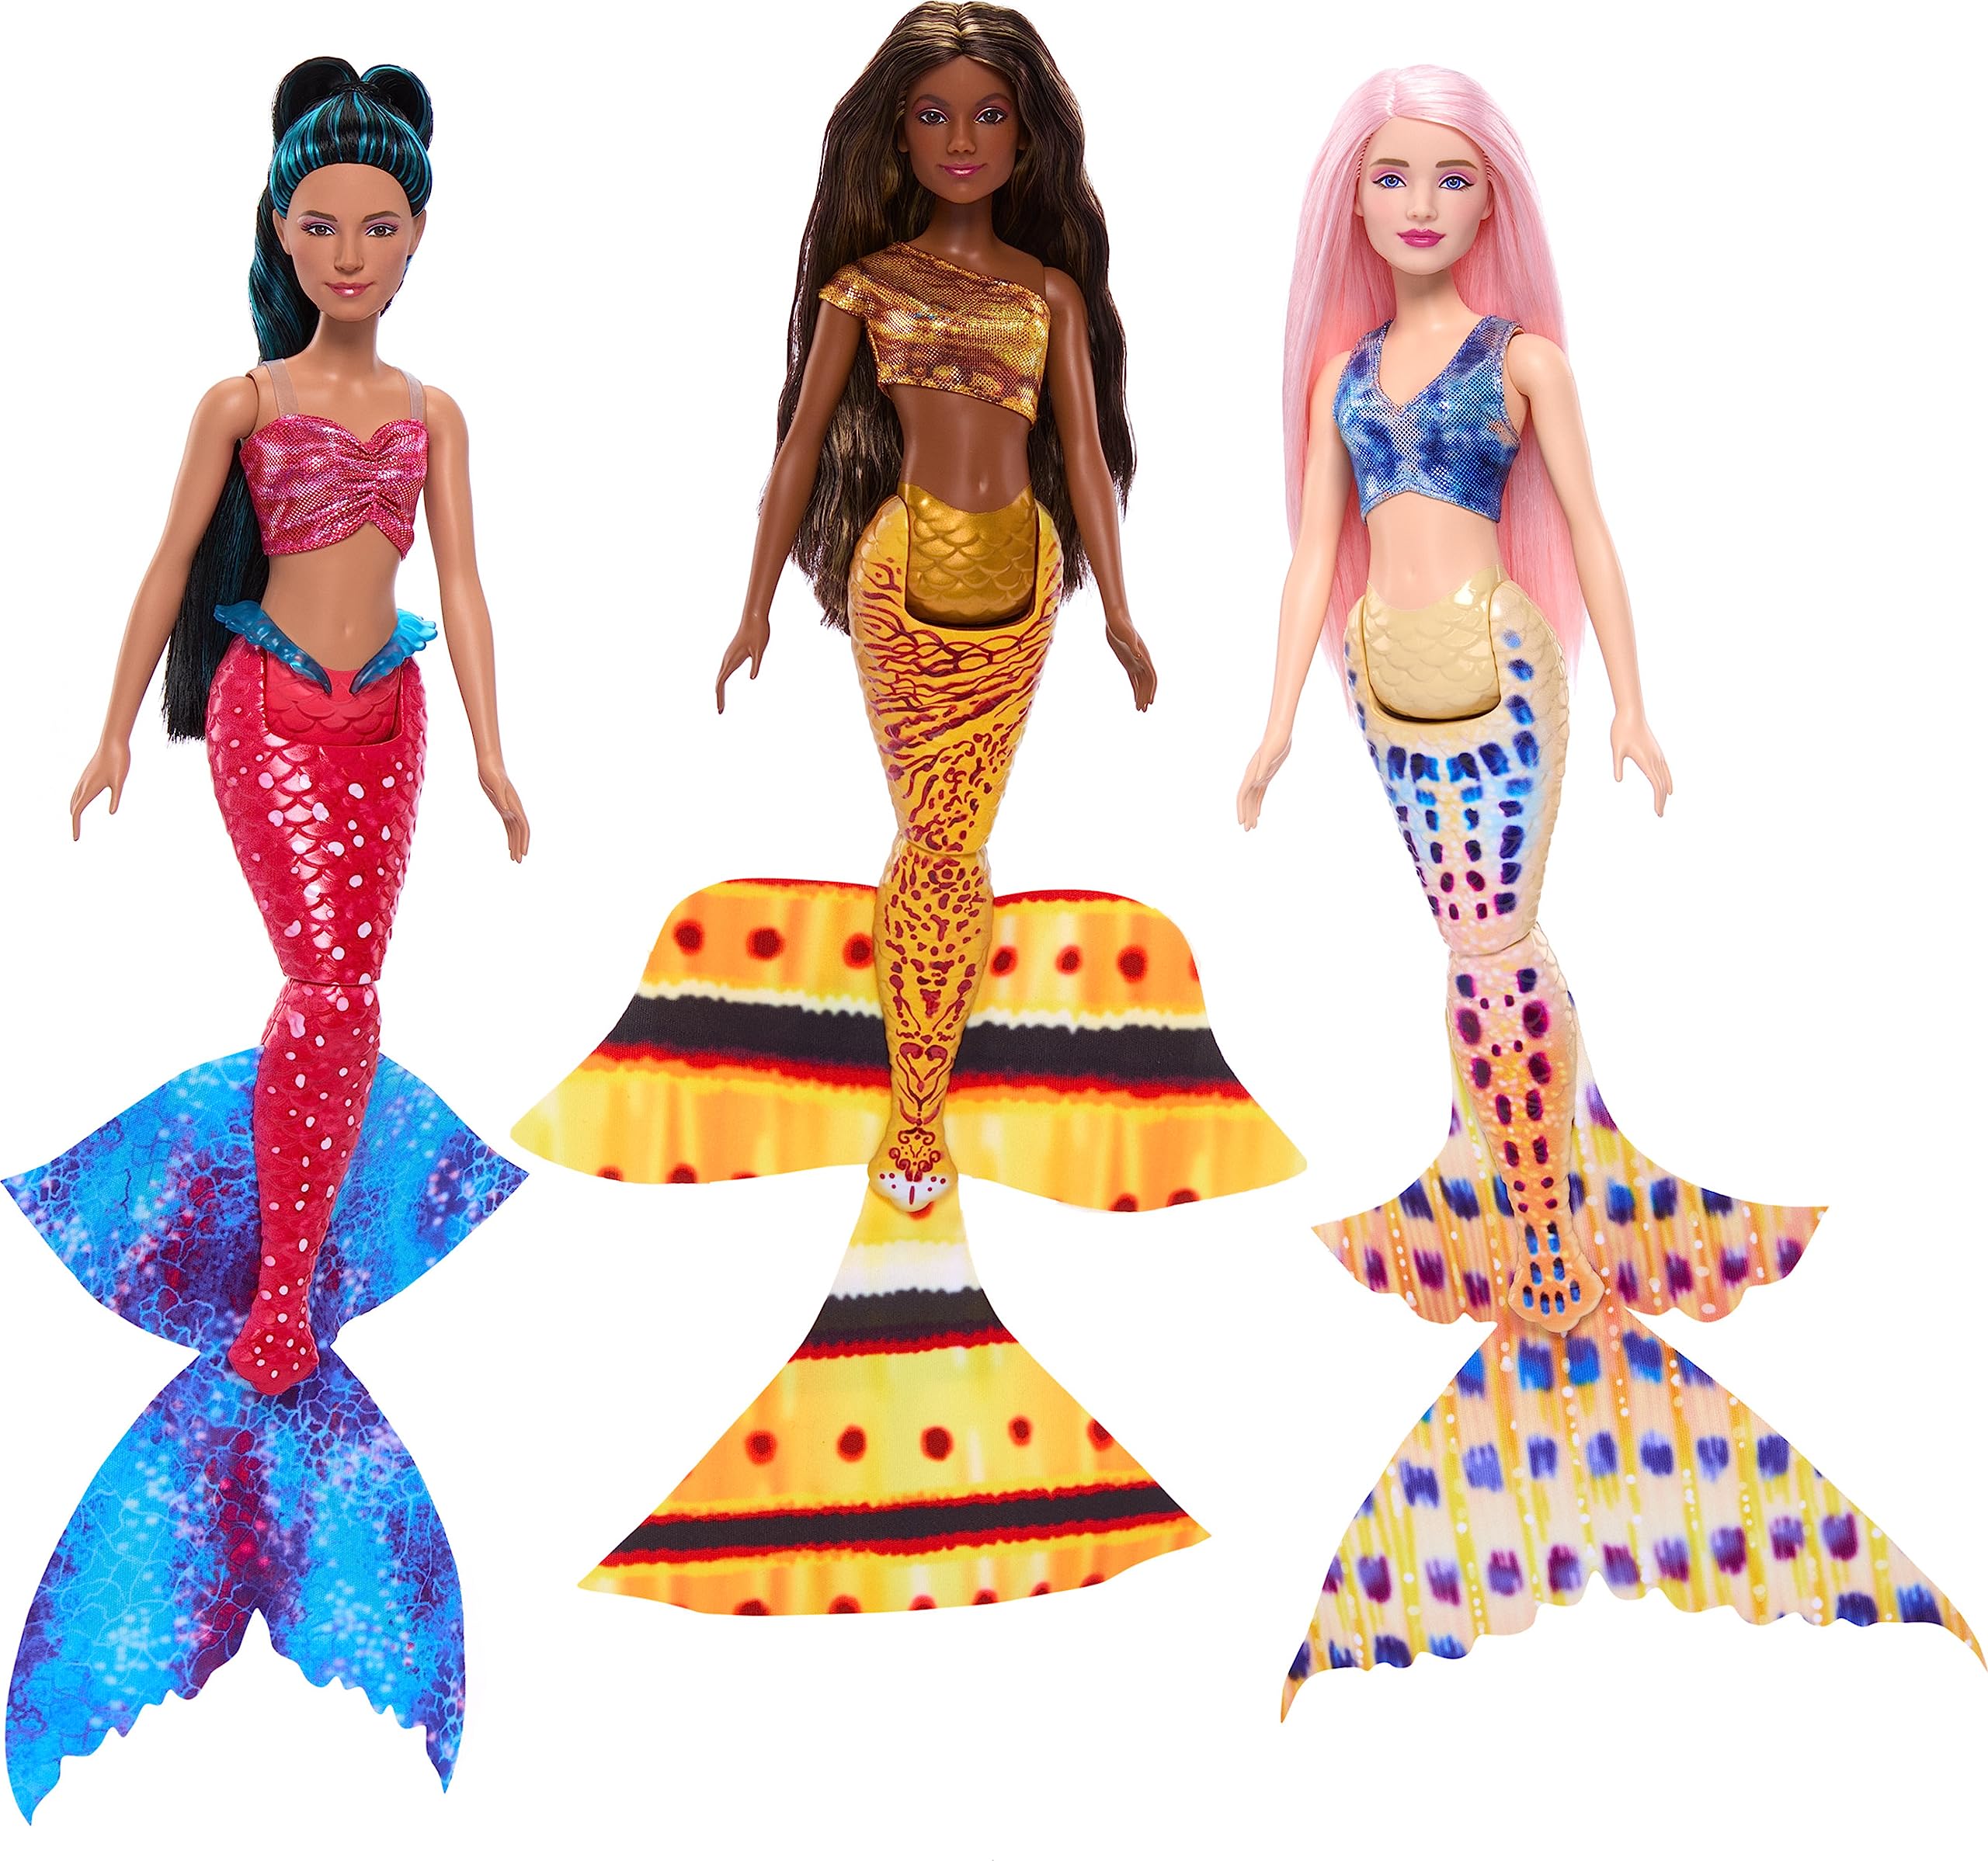 Disney The Little Mermaid Ultimate Ariel Sisters 7-Pack Set, Collection of 7 Fashion Mermaid Dolls, Toys Inspired by the Movie